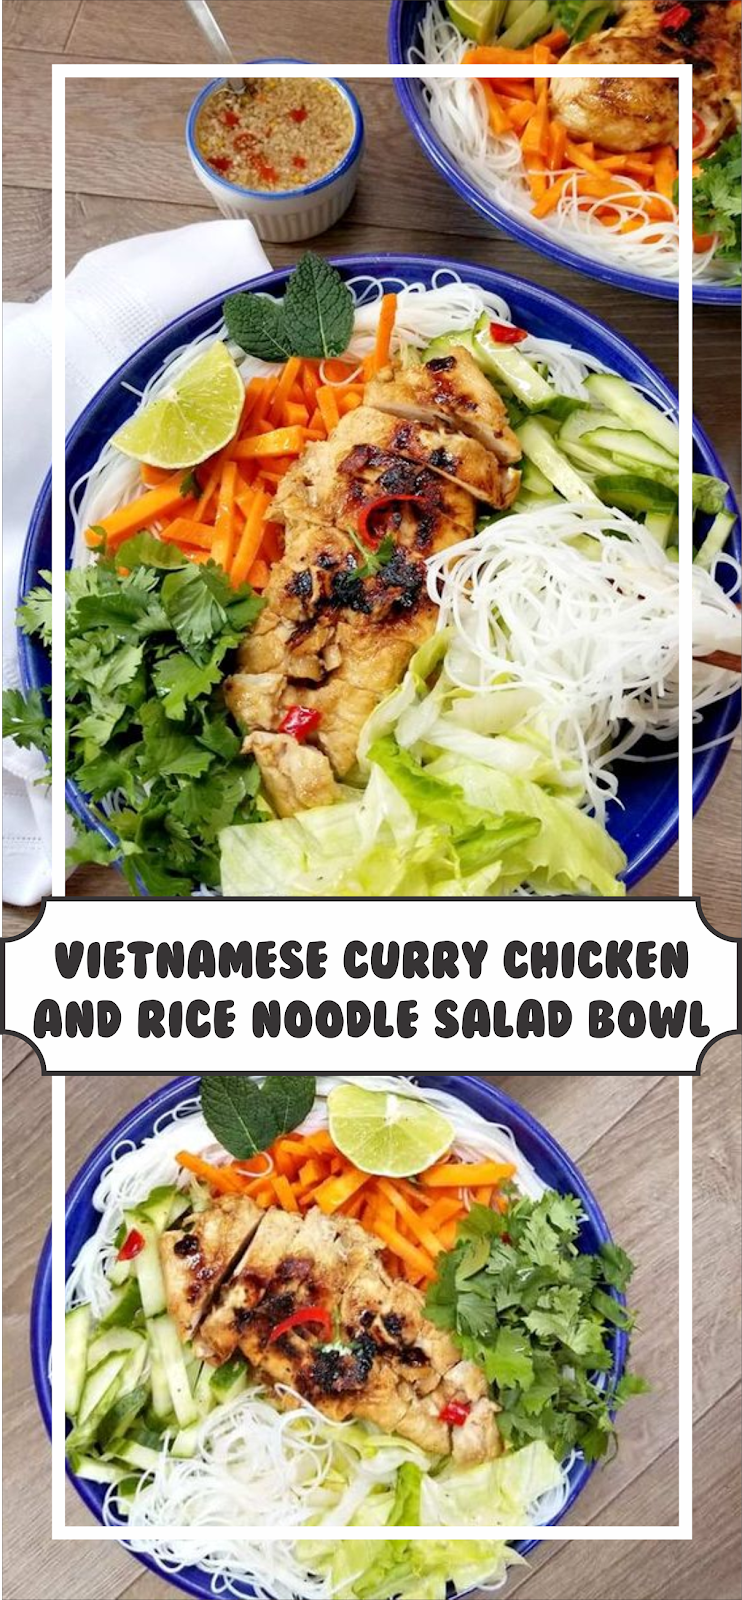 Vietnamese Curry Chicken And Rice Noodle Salad Bowl | Floats CO